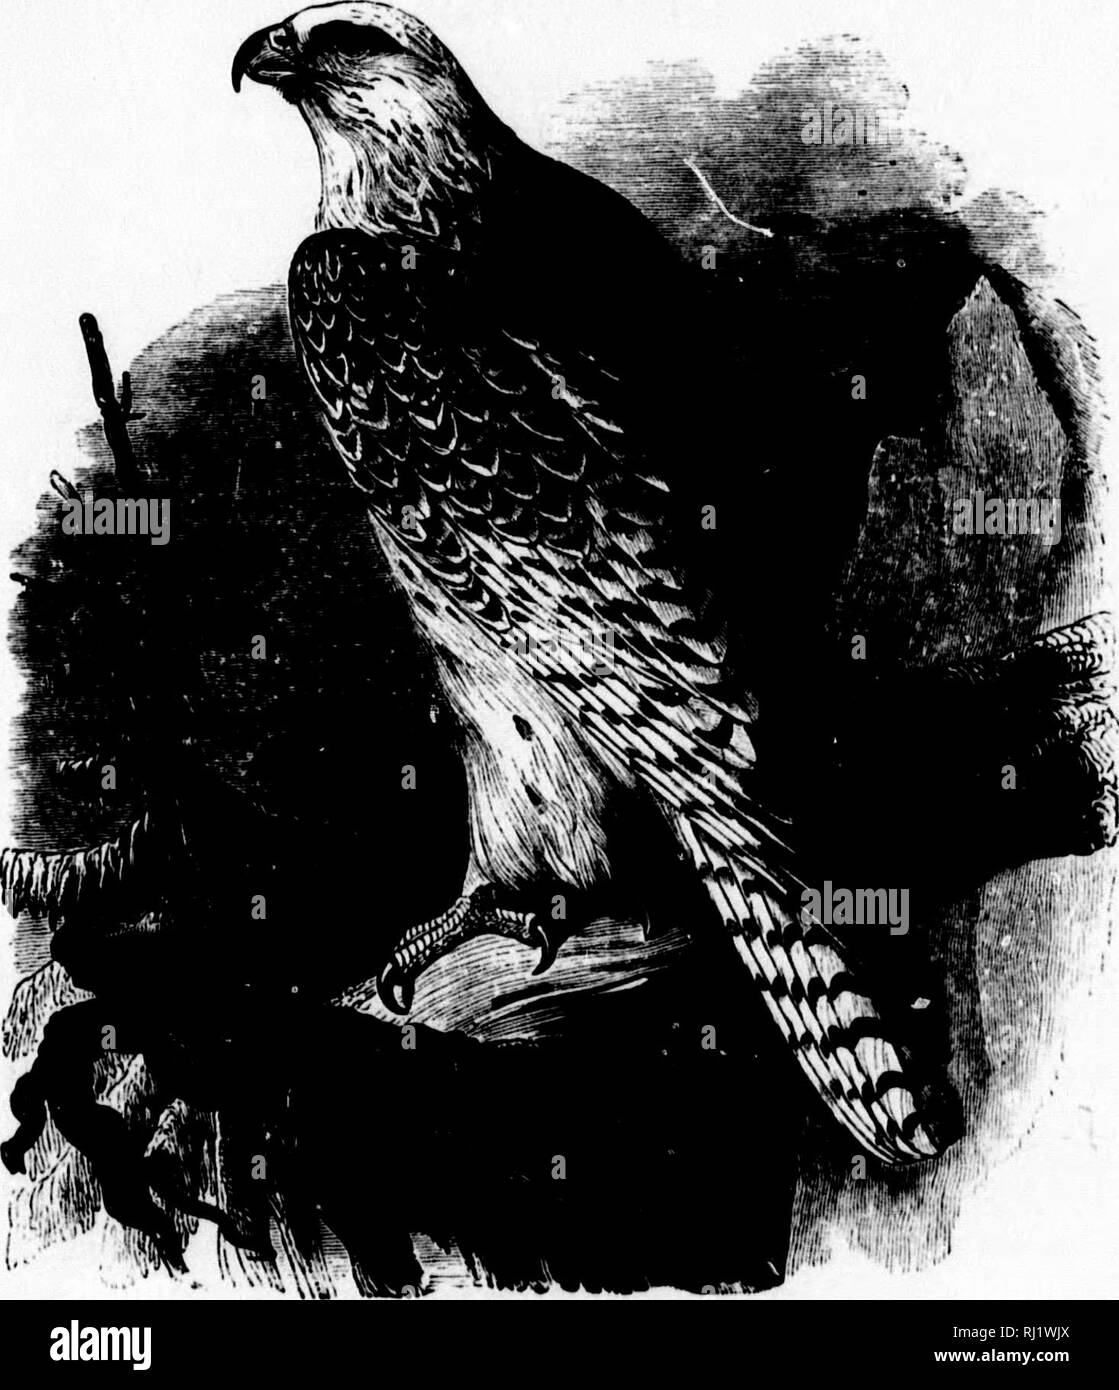 . A popular handbook of the ornithology of eastern North America [microform]. Ornithology; Ornithology; Birds; Birds; Ornithologie; Ornithologie; Oiseaux; Oiseaux. WHITE GYRFALCON. Falco islaxdus. Char. Prevailing color white, often immaculate, but usually with dark markings. Legs partially feathered. A sharp tooth near point of upper mandible ; the end of under mandible notched. Length 21 to 24 inches. AVjA Usually on a cliff; roughly made of sticks, — large dry twigs. ^S.&lt;^- 34 J ^&quot;ff o&quot;&quot; brownish, marked with reddish brown; 2.25 X 1.25. GRAY GYRFALCON. Fai.co ru.sticolus. Stock Photo